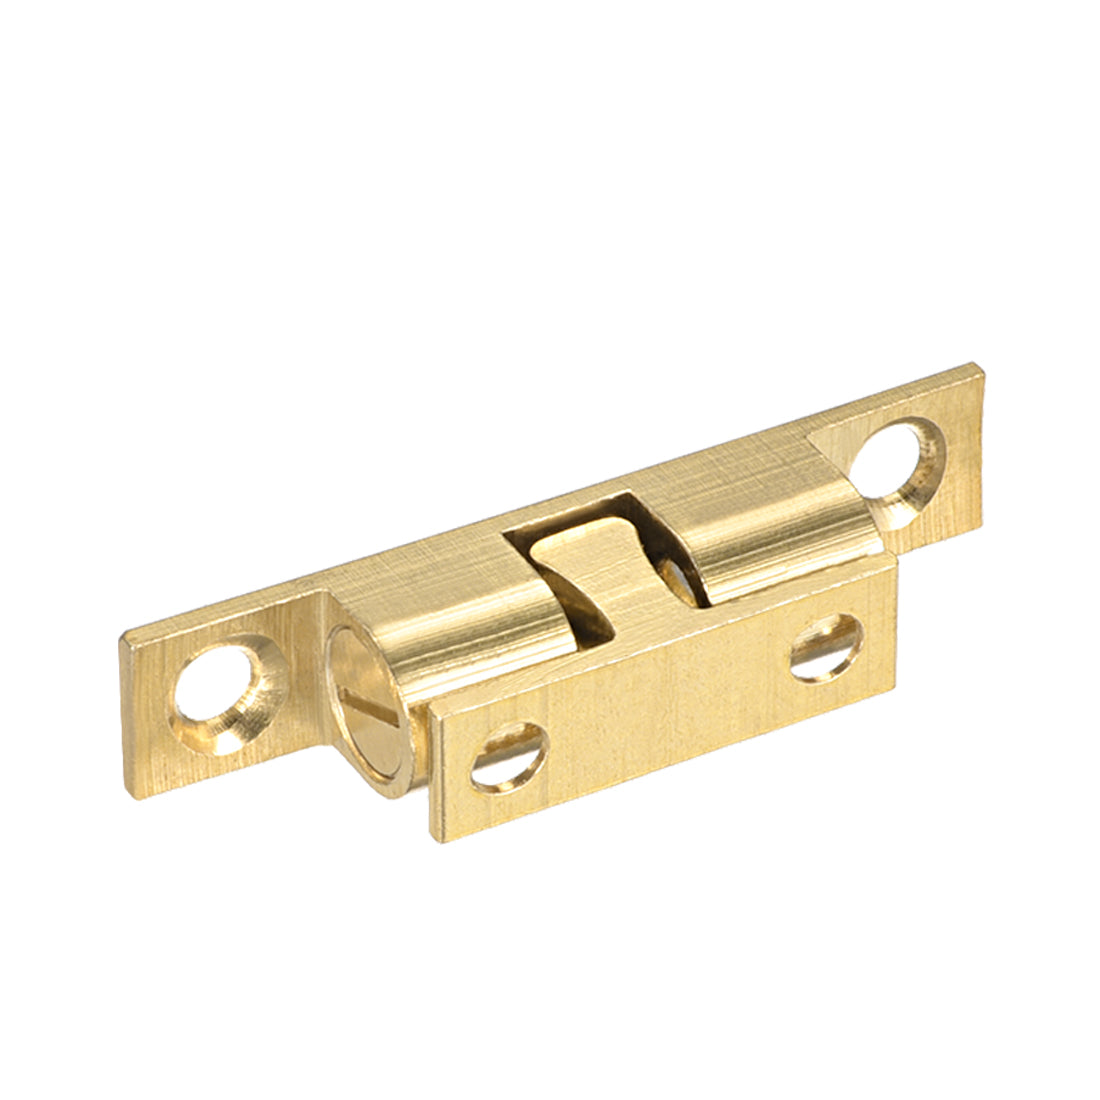 uxcell Uxcell Cabinet Door Closet Brass Double Ball Catch Tension Latch 50mm Length Gold Tone